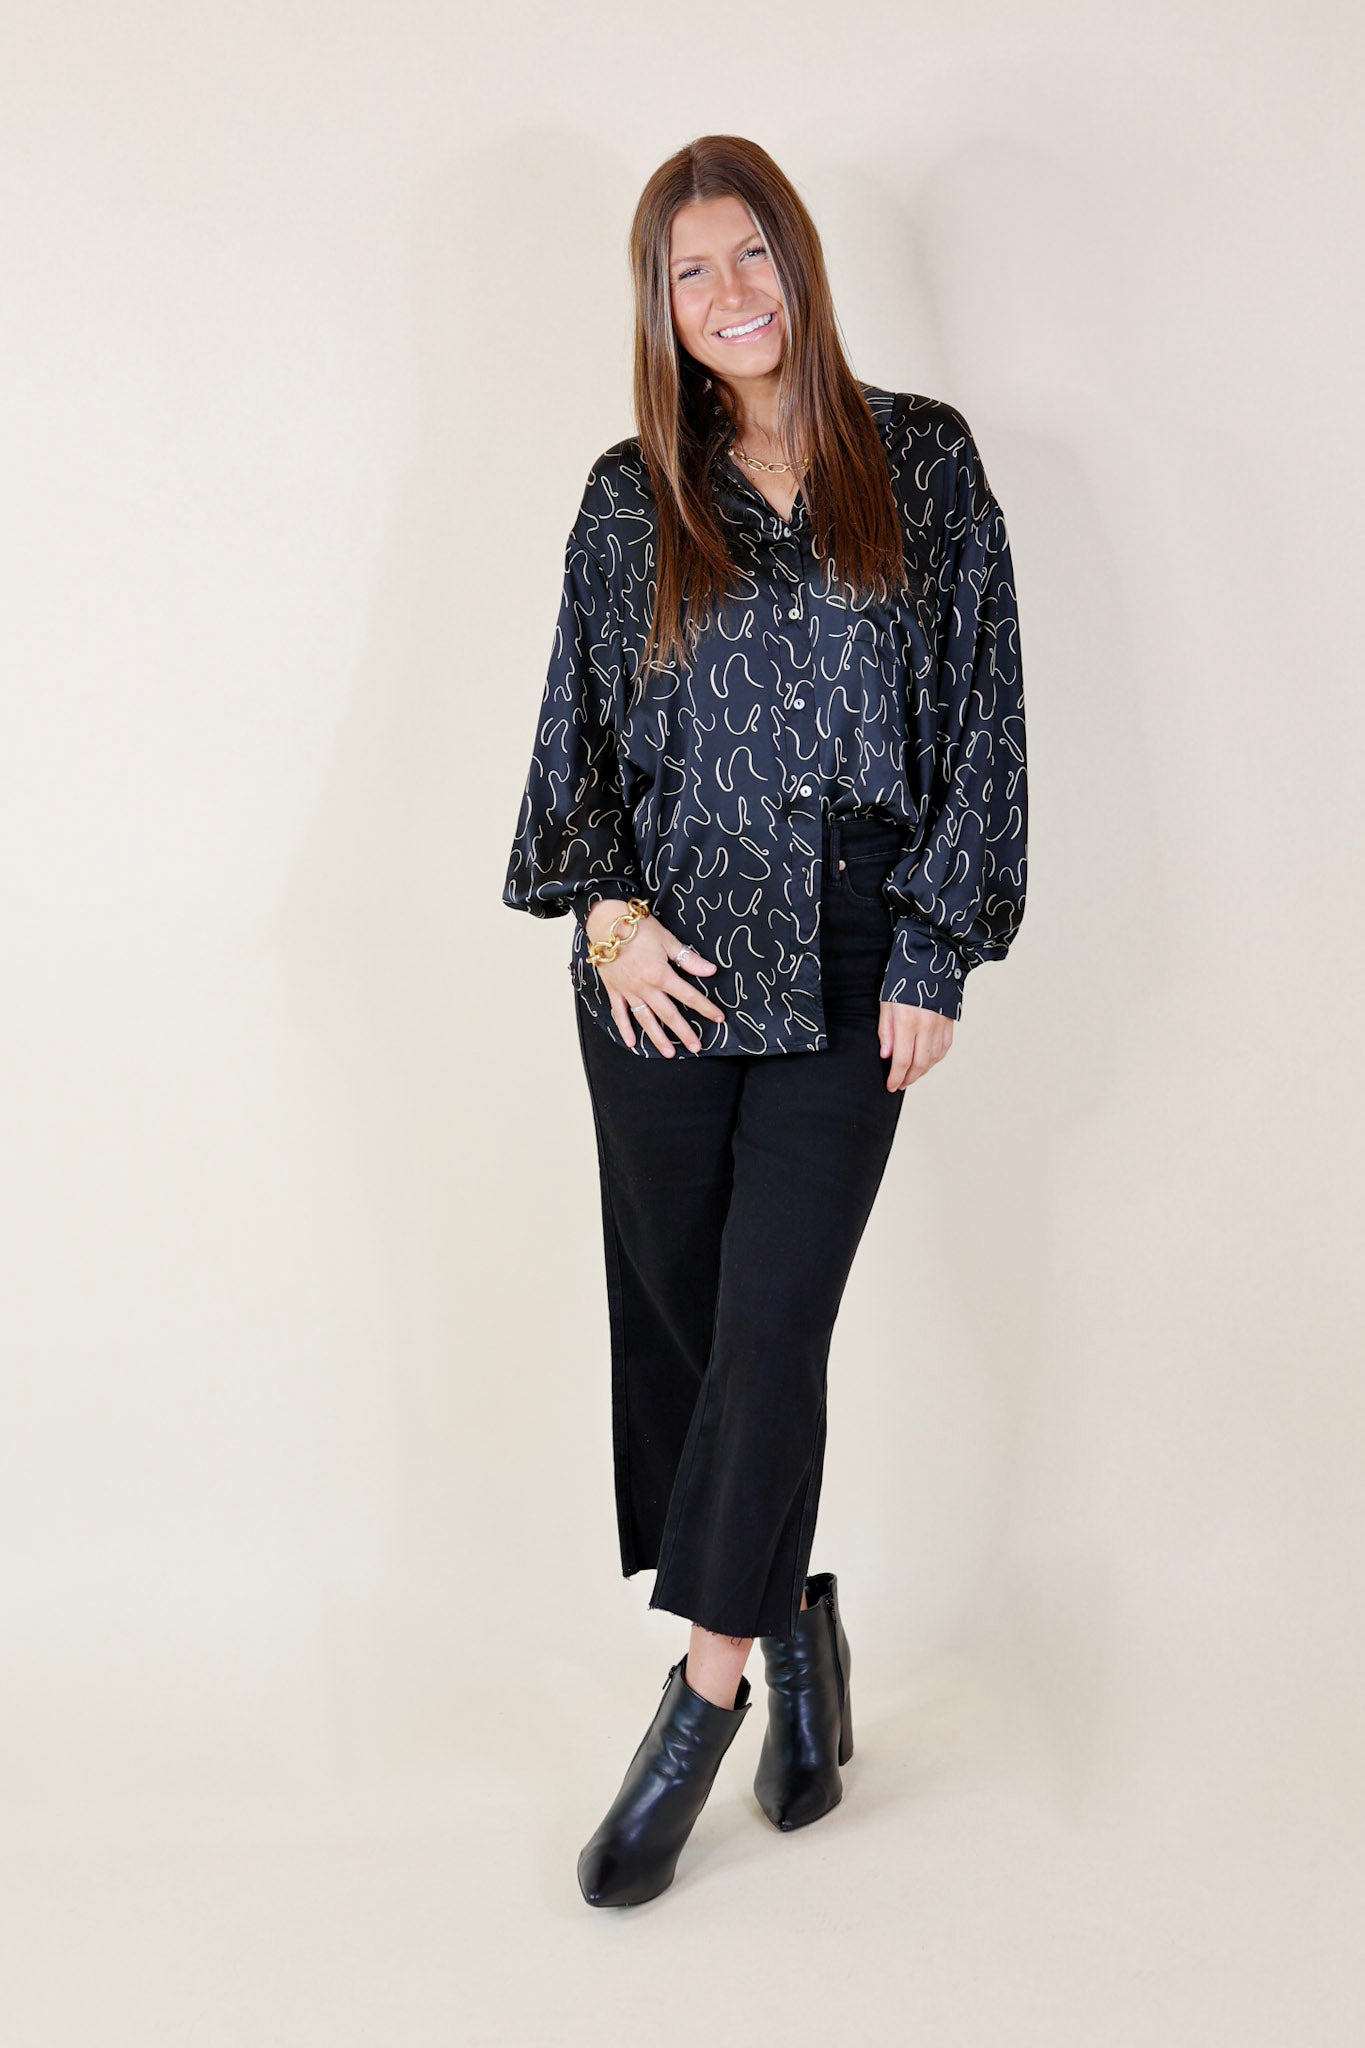 Endlessly Obsessed Satin Button Up Swirl Print Top in Black - Giddy Up Glamour Boutique